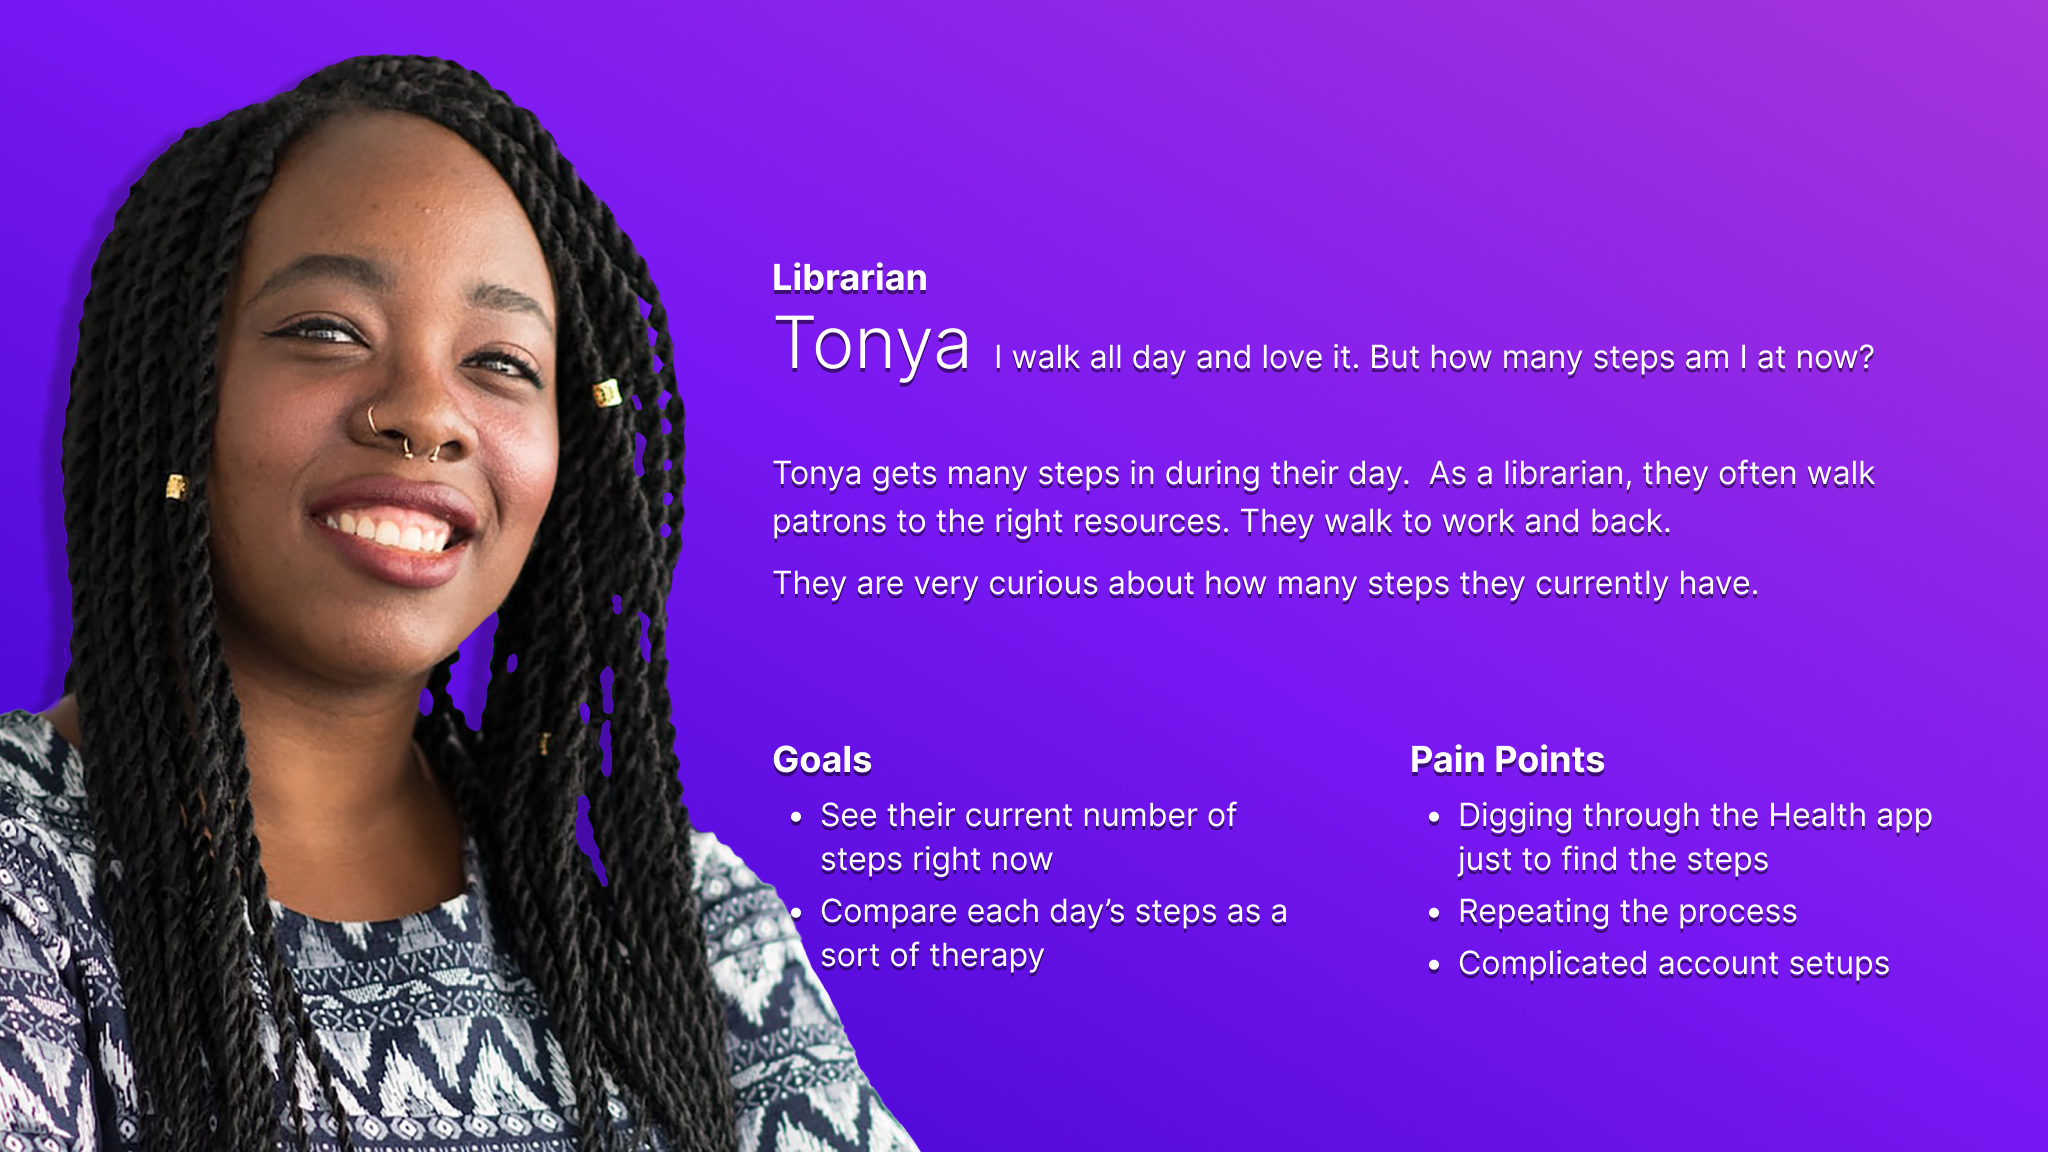 Persona card for Tonya who represents users who want easy-to-see stats on their daily step progress.